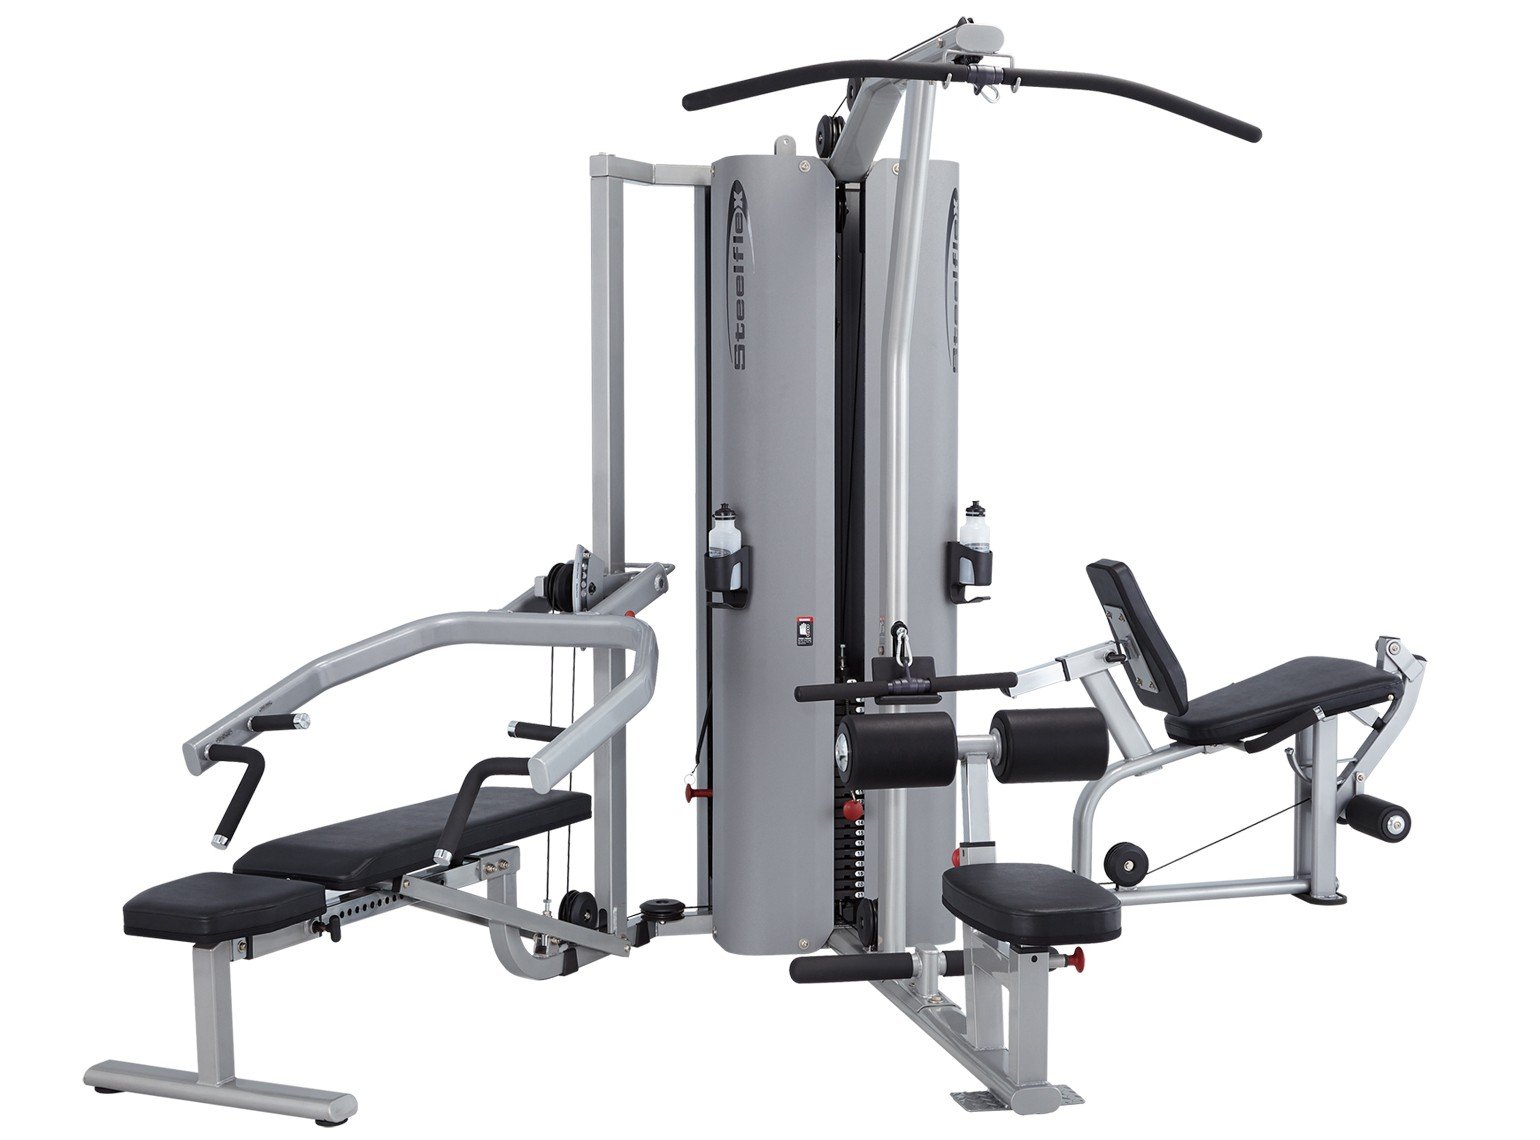 SteelFlex MG300 Commercial Multi Station Gym Machine 630 lb. Pulley Weight Stack - image 4 of 4